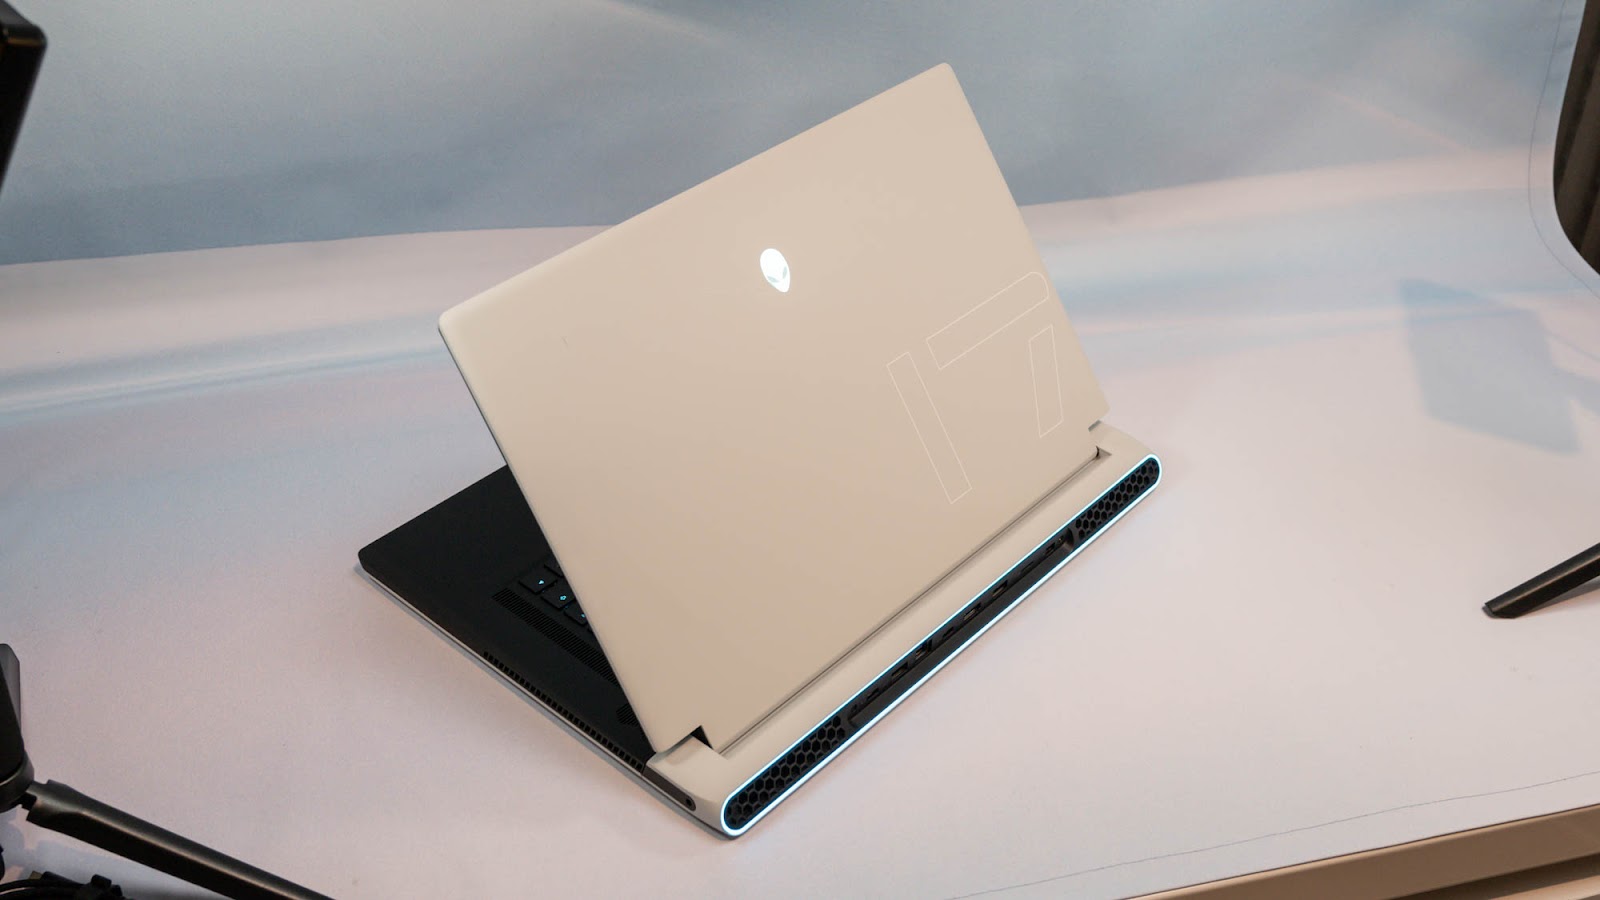 This image shows the Alienware X17 R2 on the table.